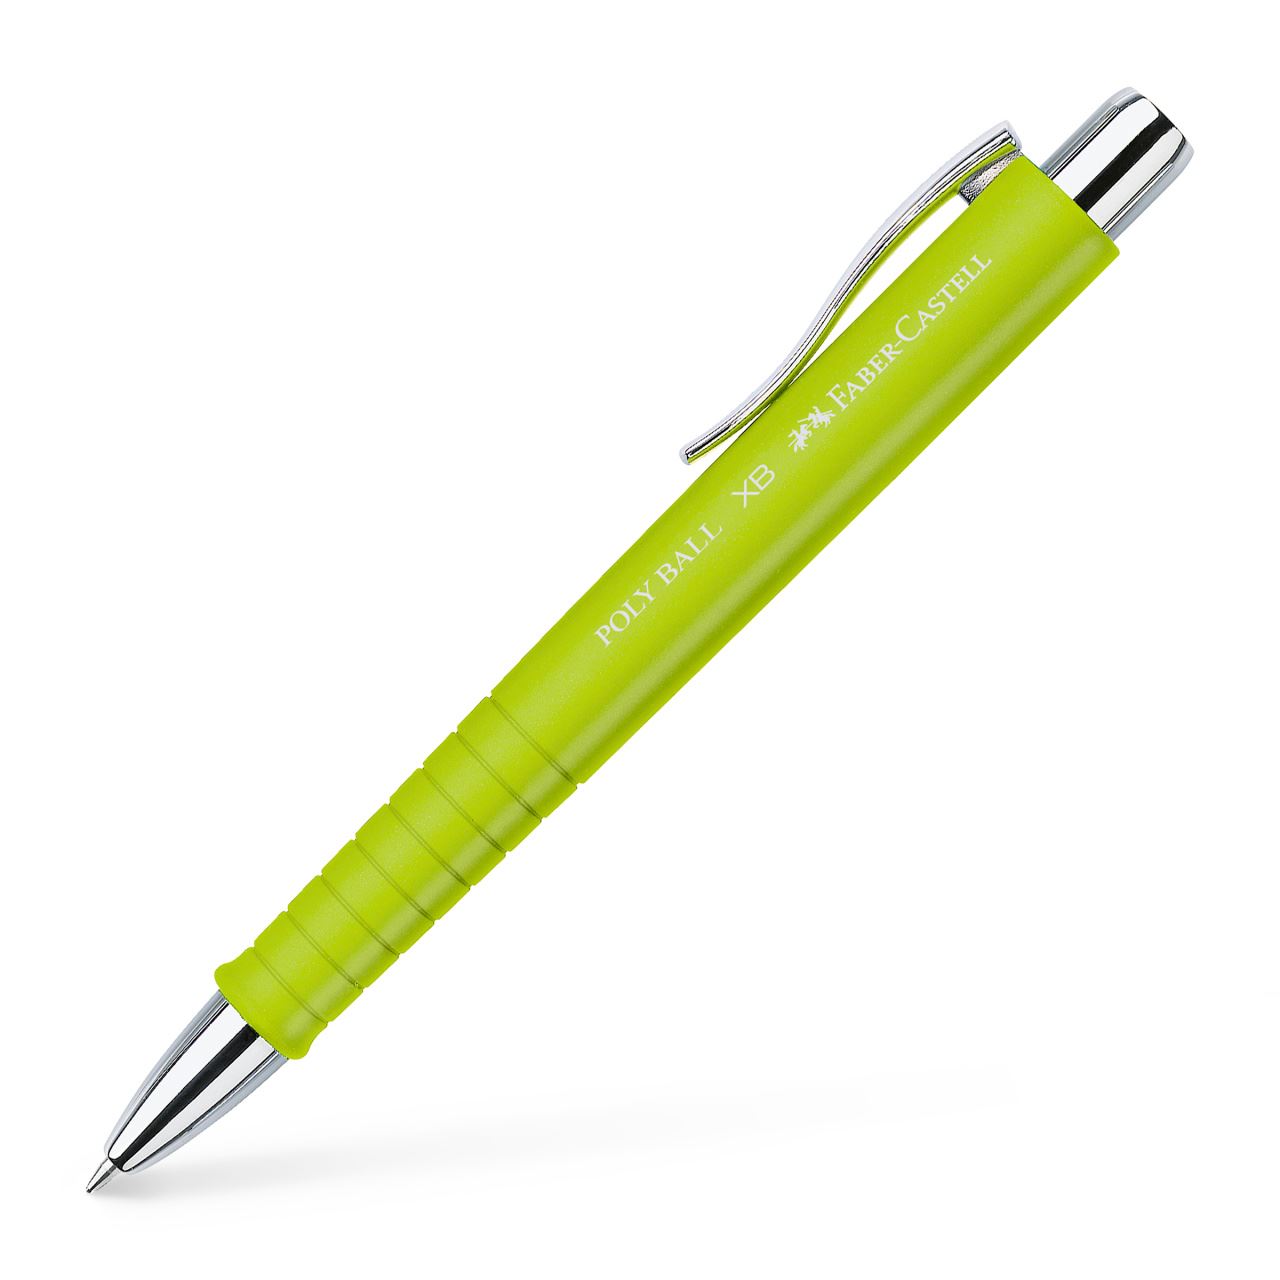 Faber-Castell - Stylo-bille Poly Ball XB lime